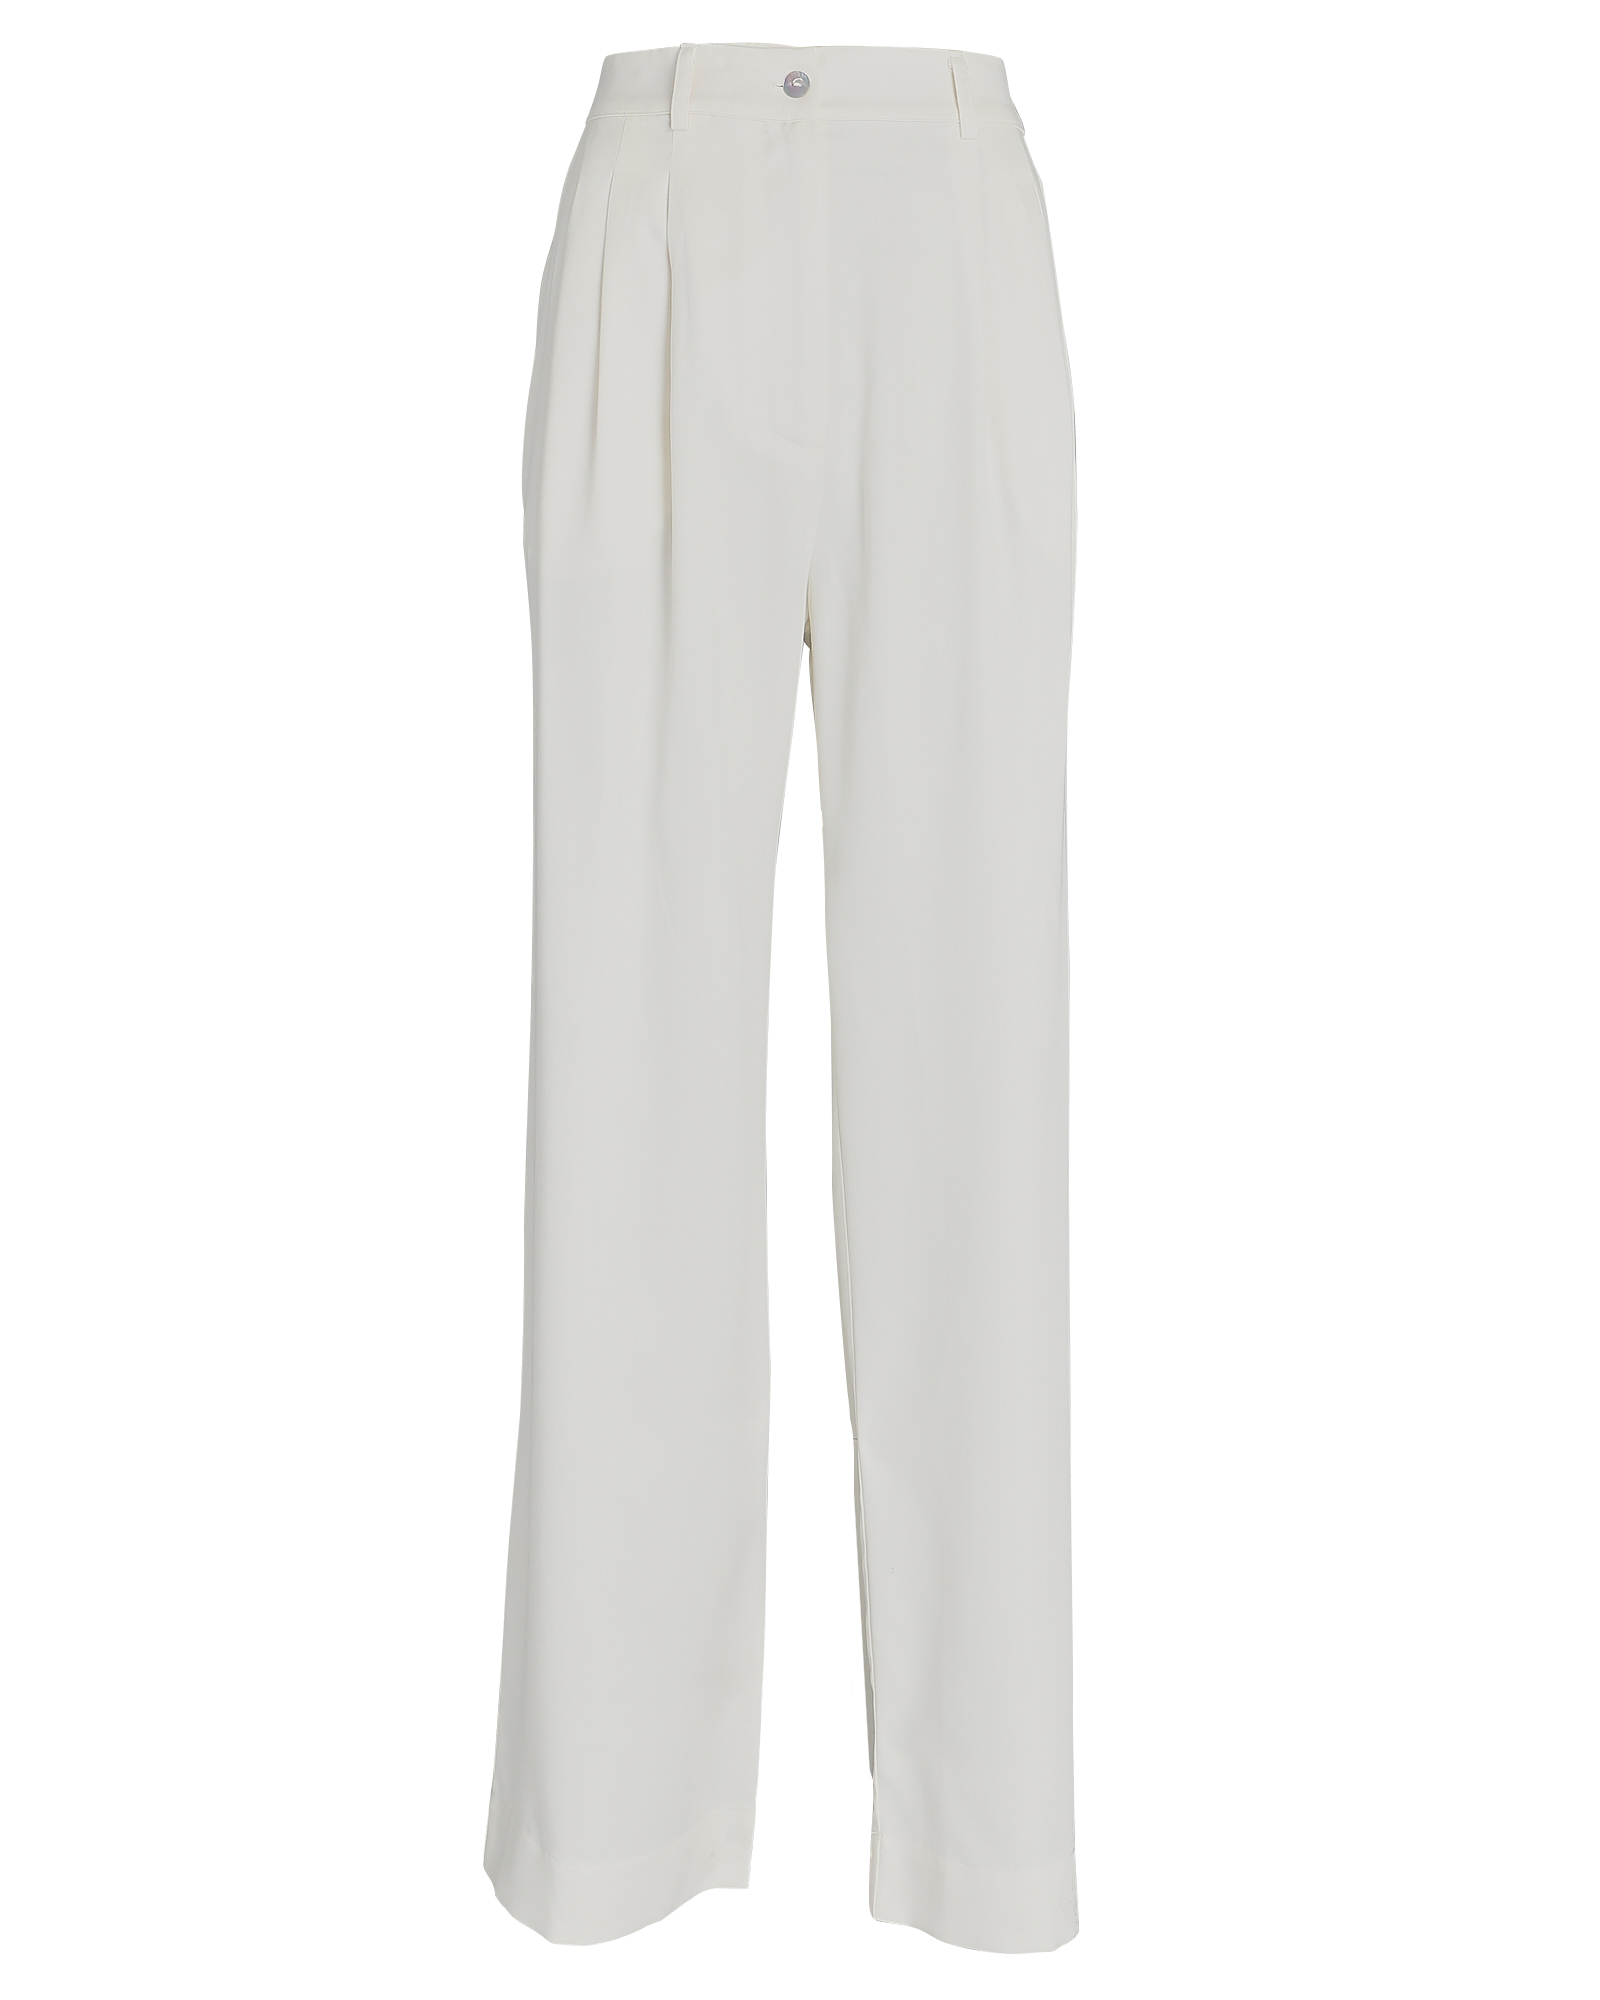 DONNI. Pleated Trousers | INTERMIX®